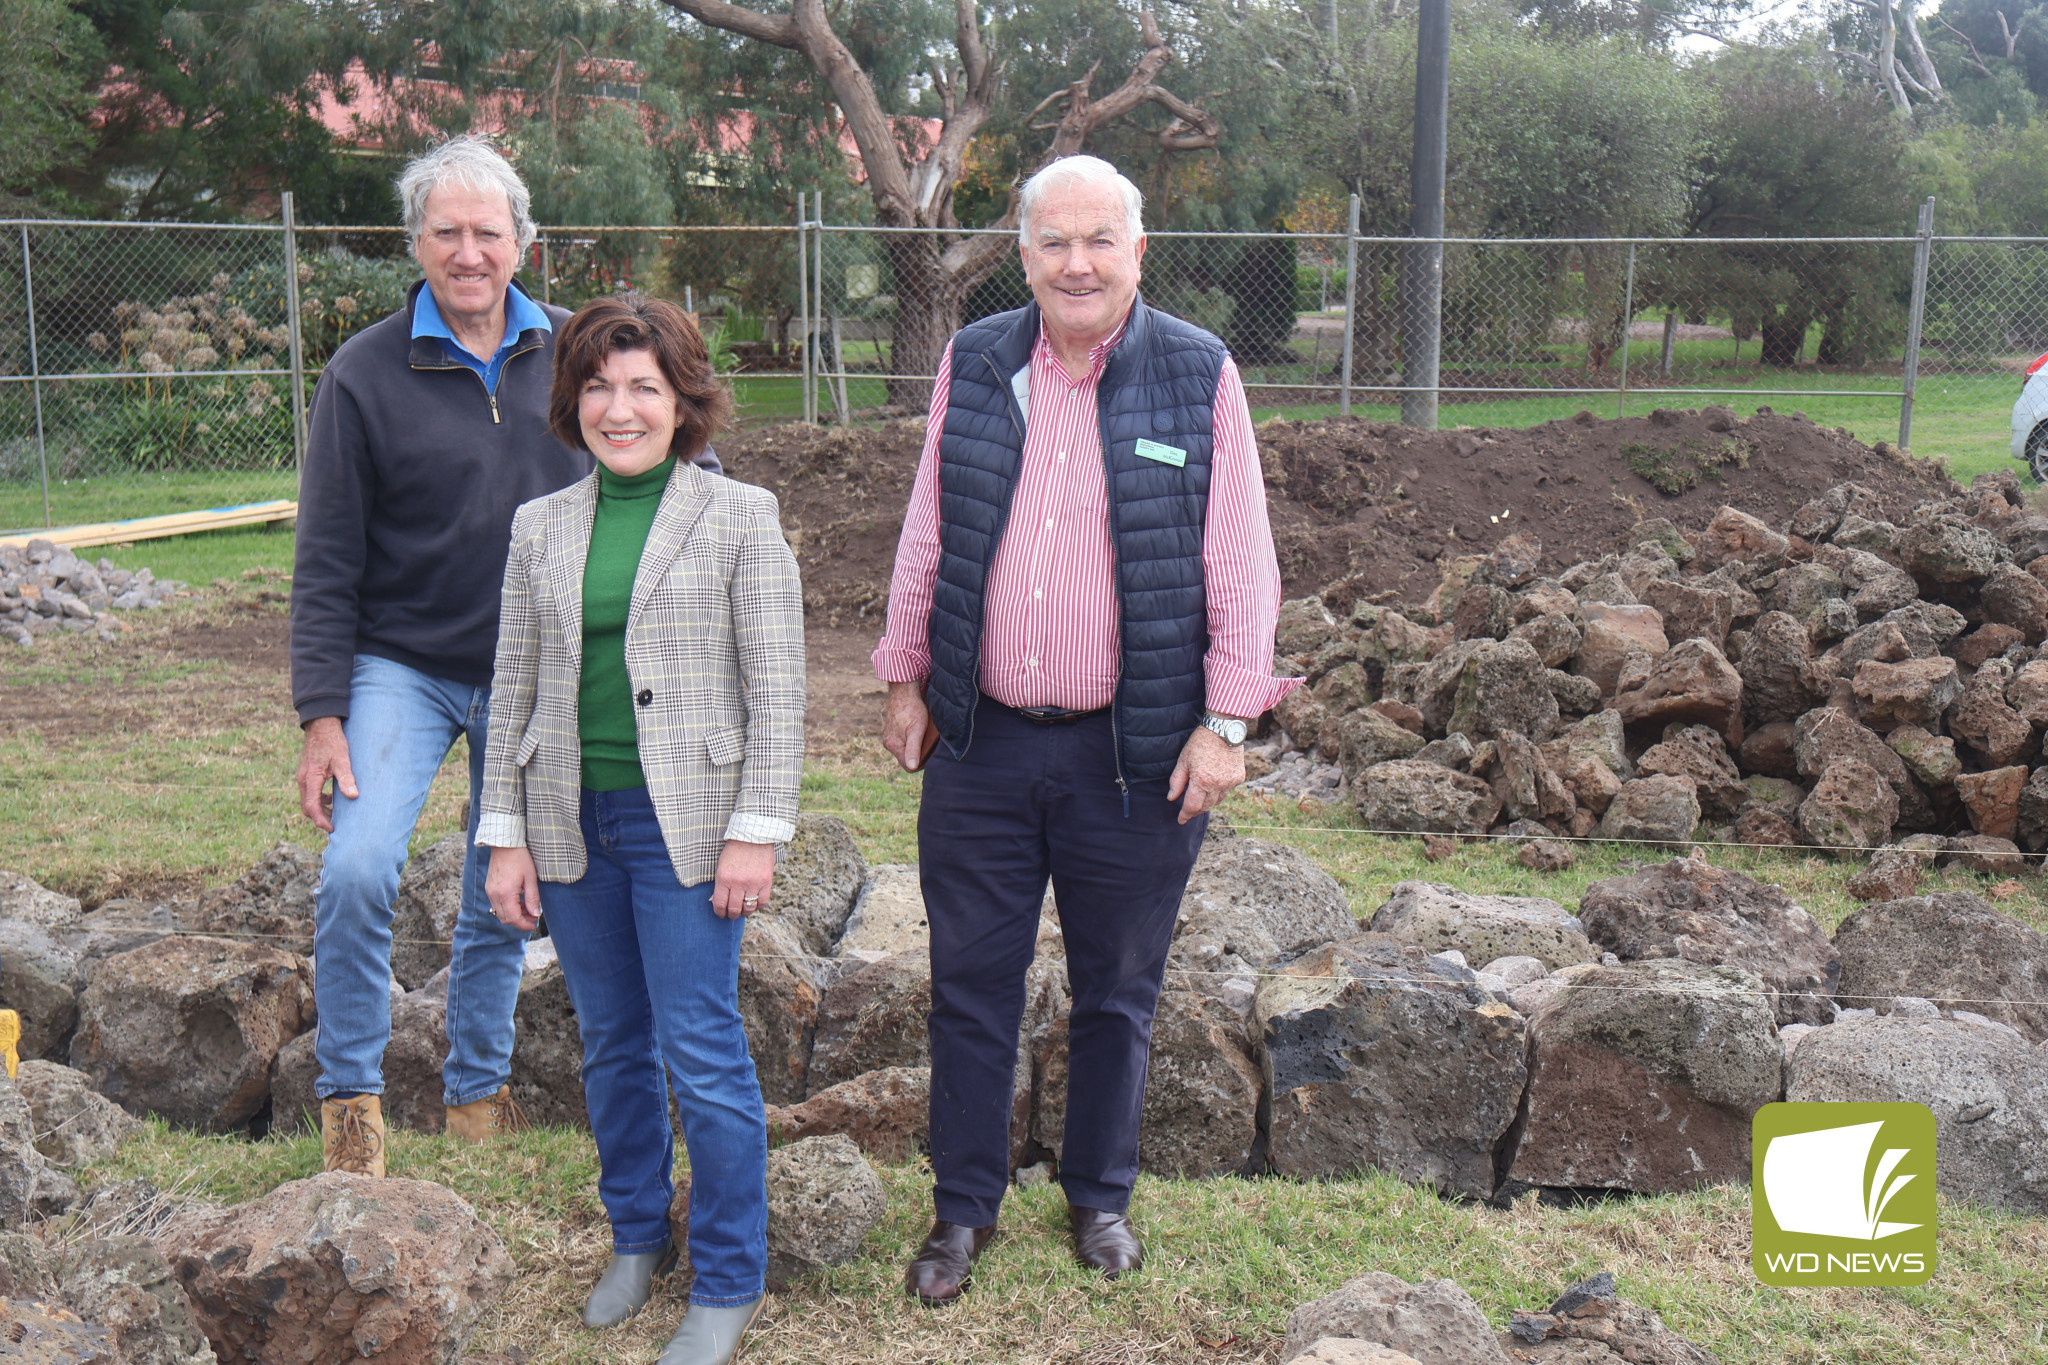 Under construction: David Long, Cr Geraldine Conheady and Des McKinnon are pleased to see works begin on the new signage being installed to welcome travellers to Terang.